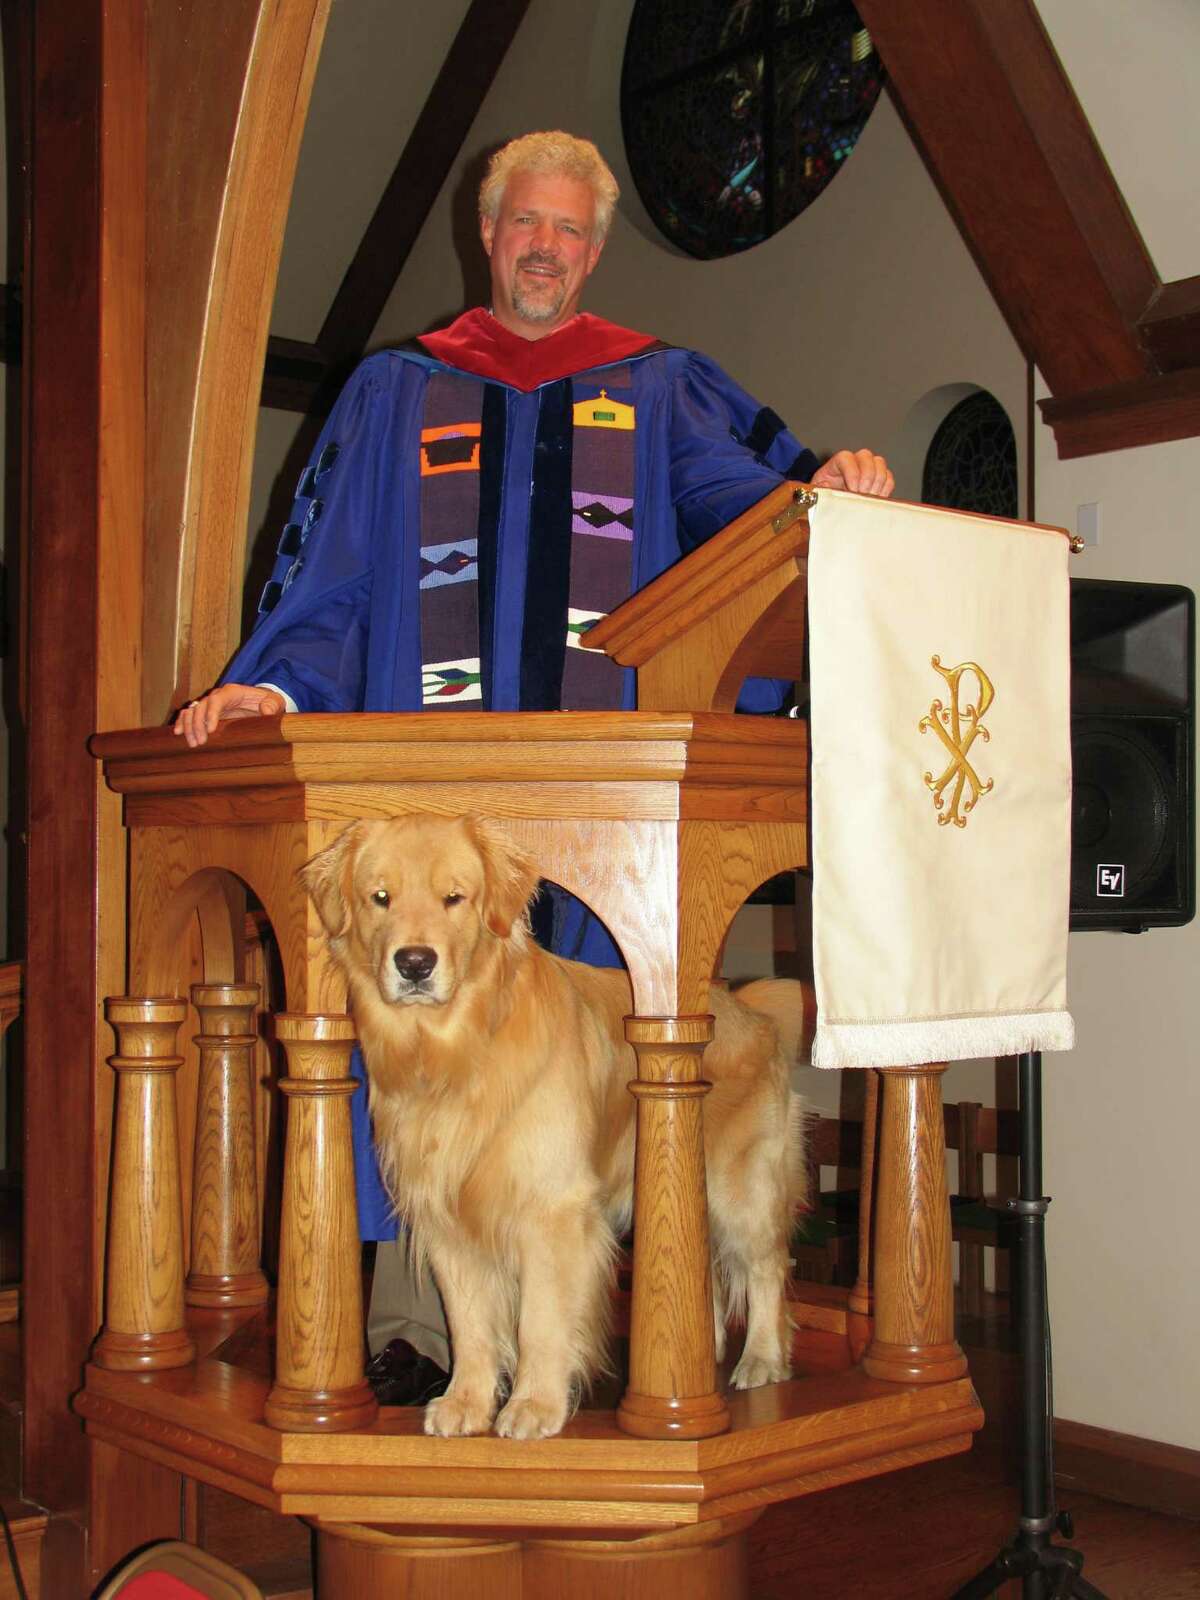 The Rev. William "Bill" Evertsberg is leaving First Presbyterian Church after 17 years. Here, at his pre-Christmas sermon, Everstberg is joined by his loyal golden retriever, Dudley, who assisted Evertsberg during the holidays. ìI took the role of a shepherd at Jesusí nativity,î Evertsberg says, ìwith Dudley playing the role of the faithful sheepdog.î Dudley has also stepped in to play Jesusí donkey on Palm Sunday.